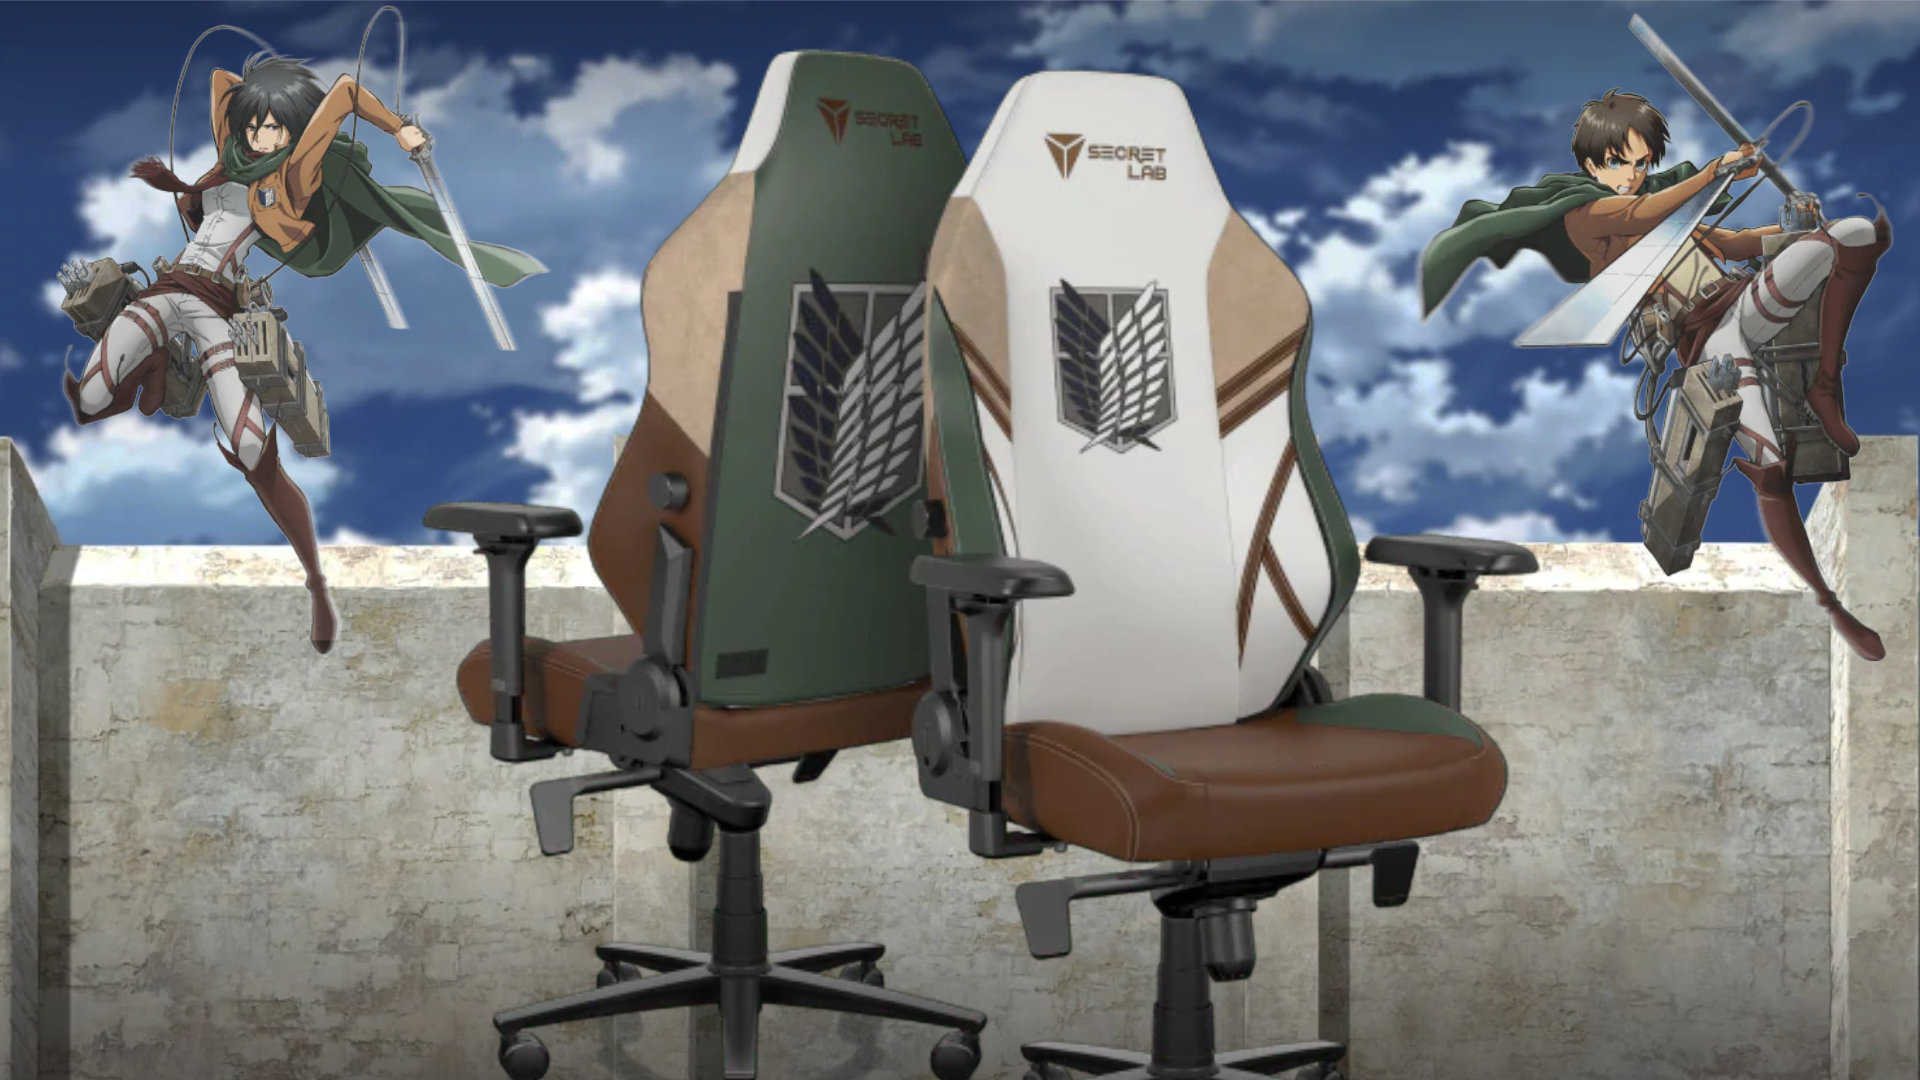 Secretlab celebrates Attack on Titan with a new gaming chair